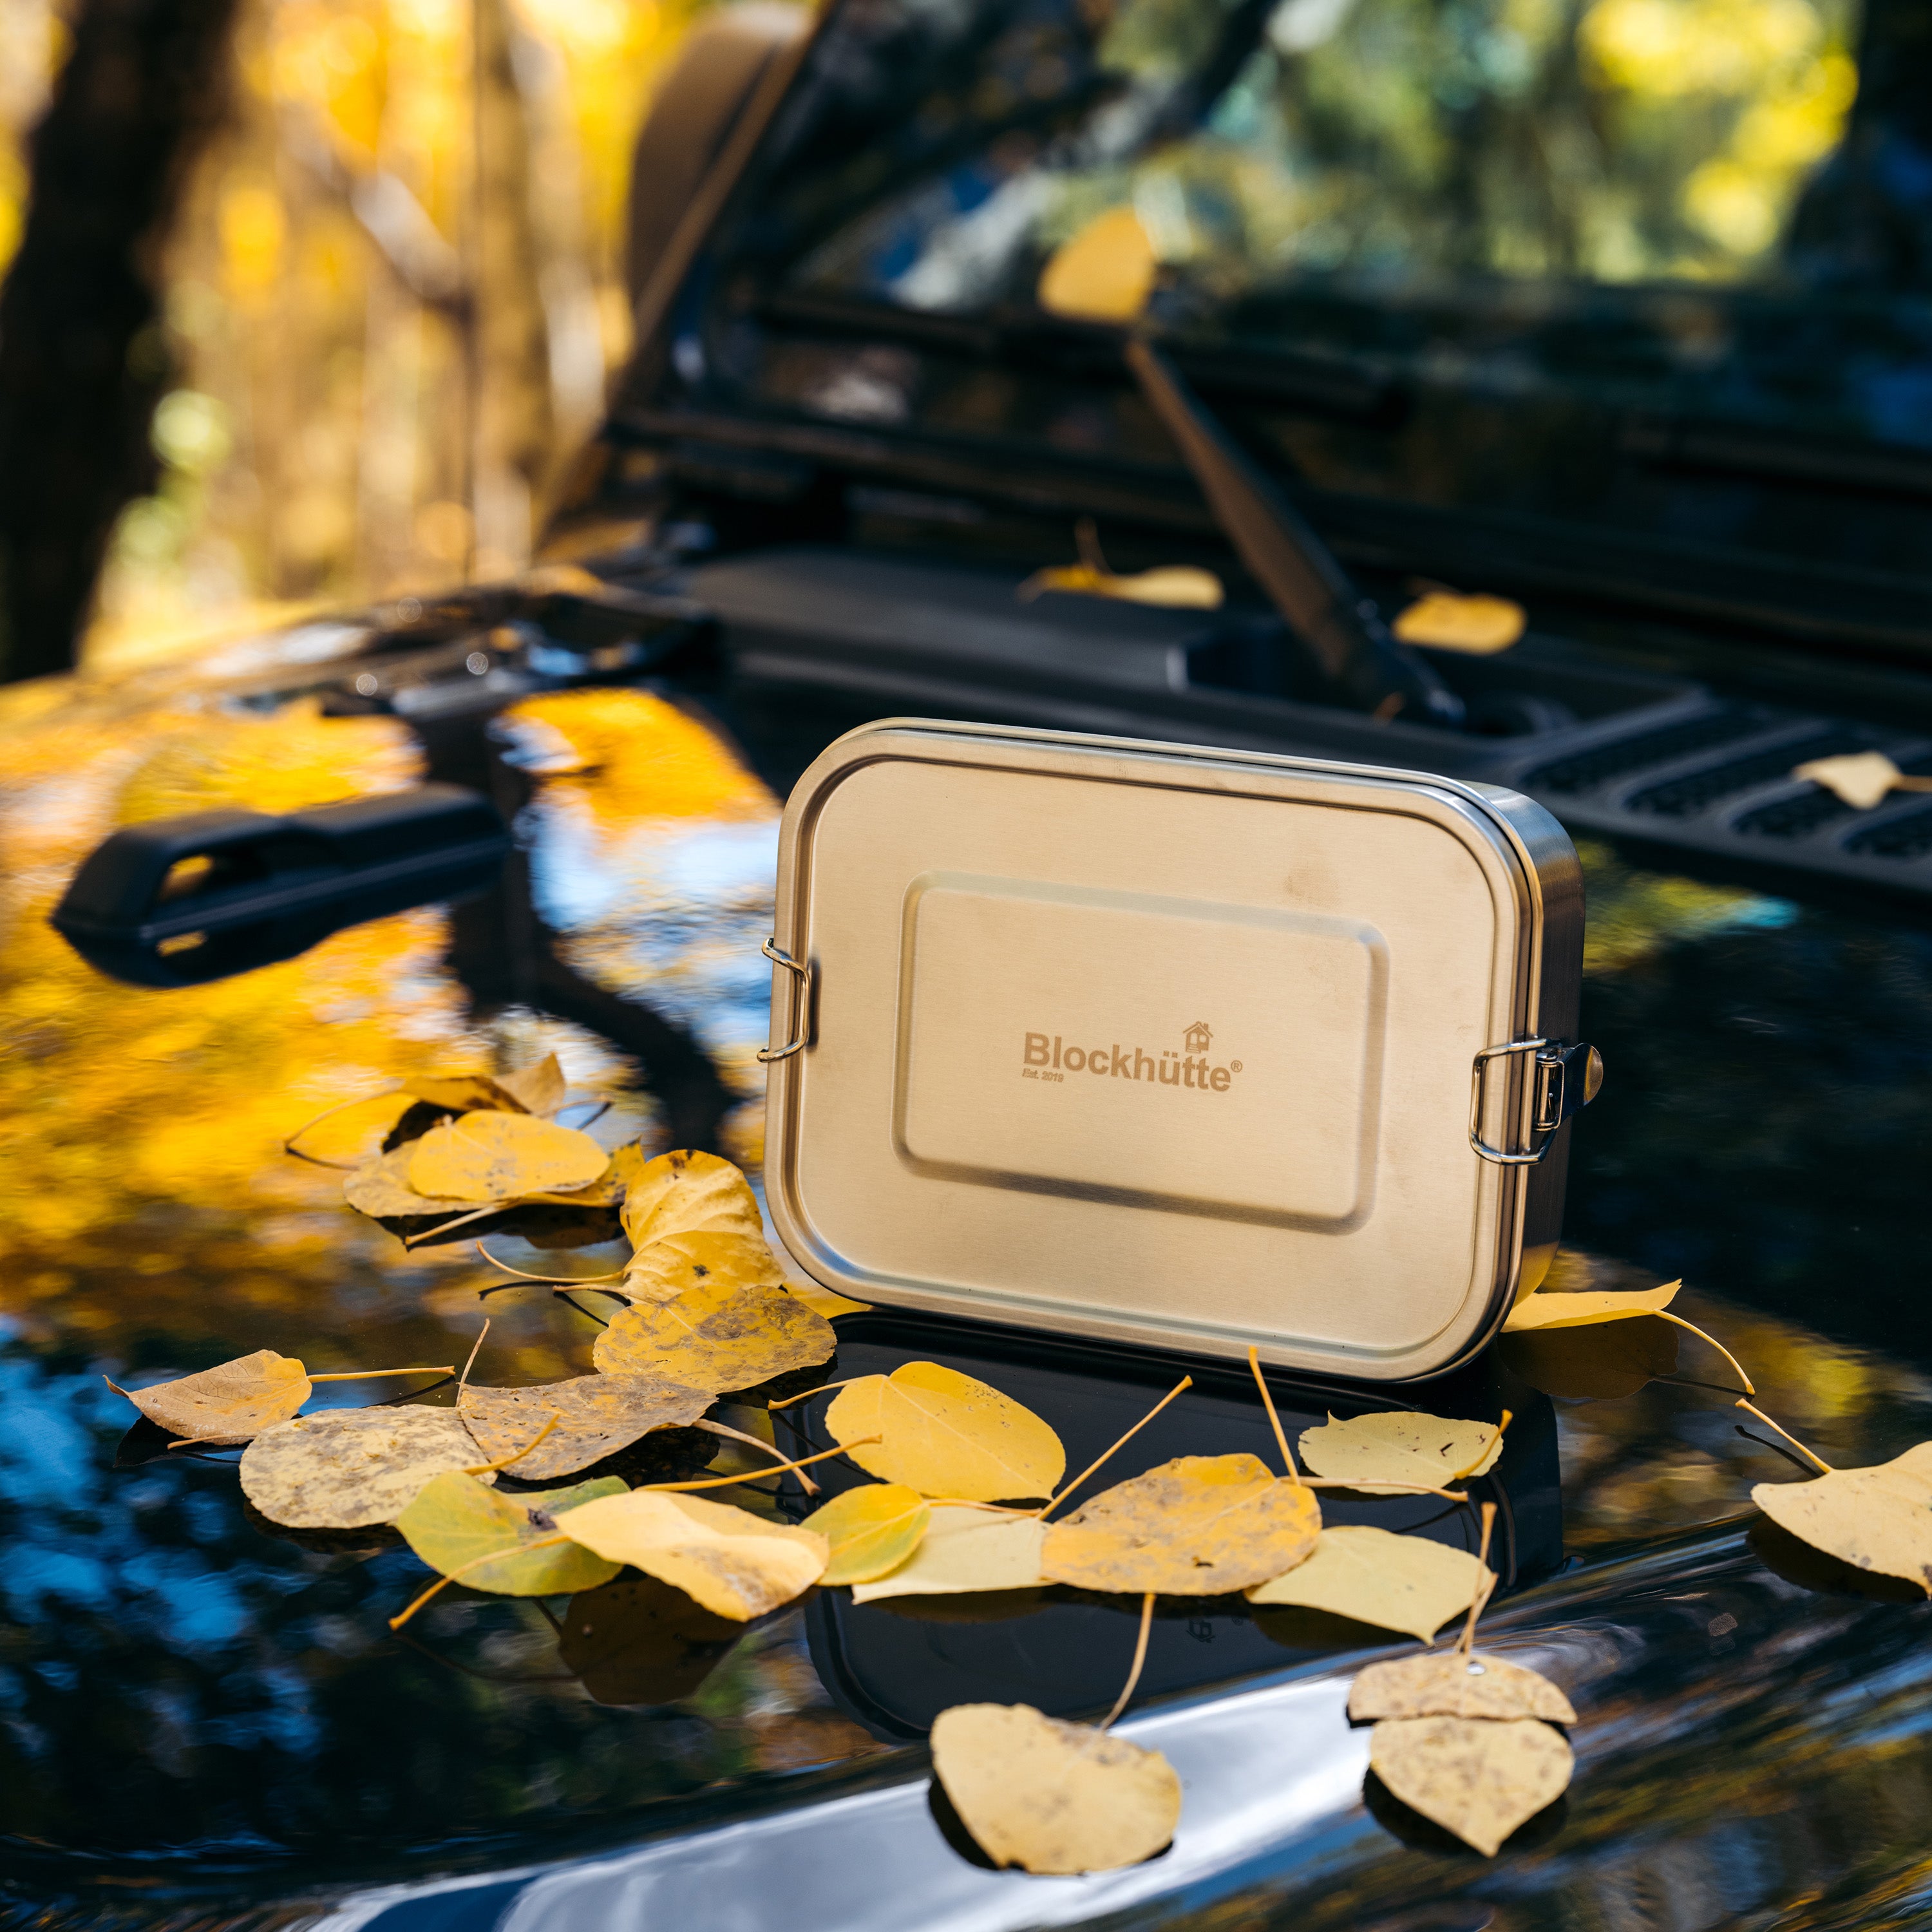 Blockhuette stainless steel lunch box on a car in the forrest 